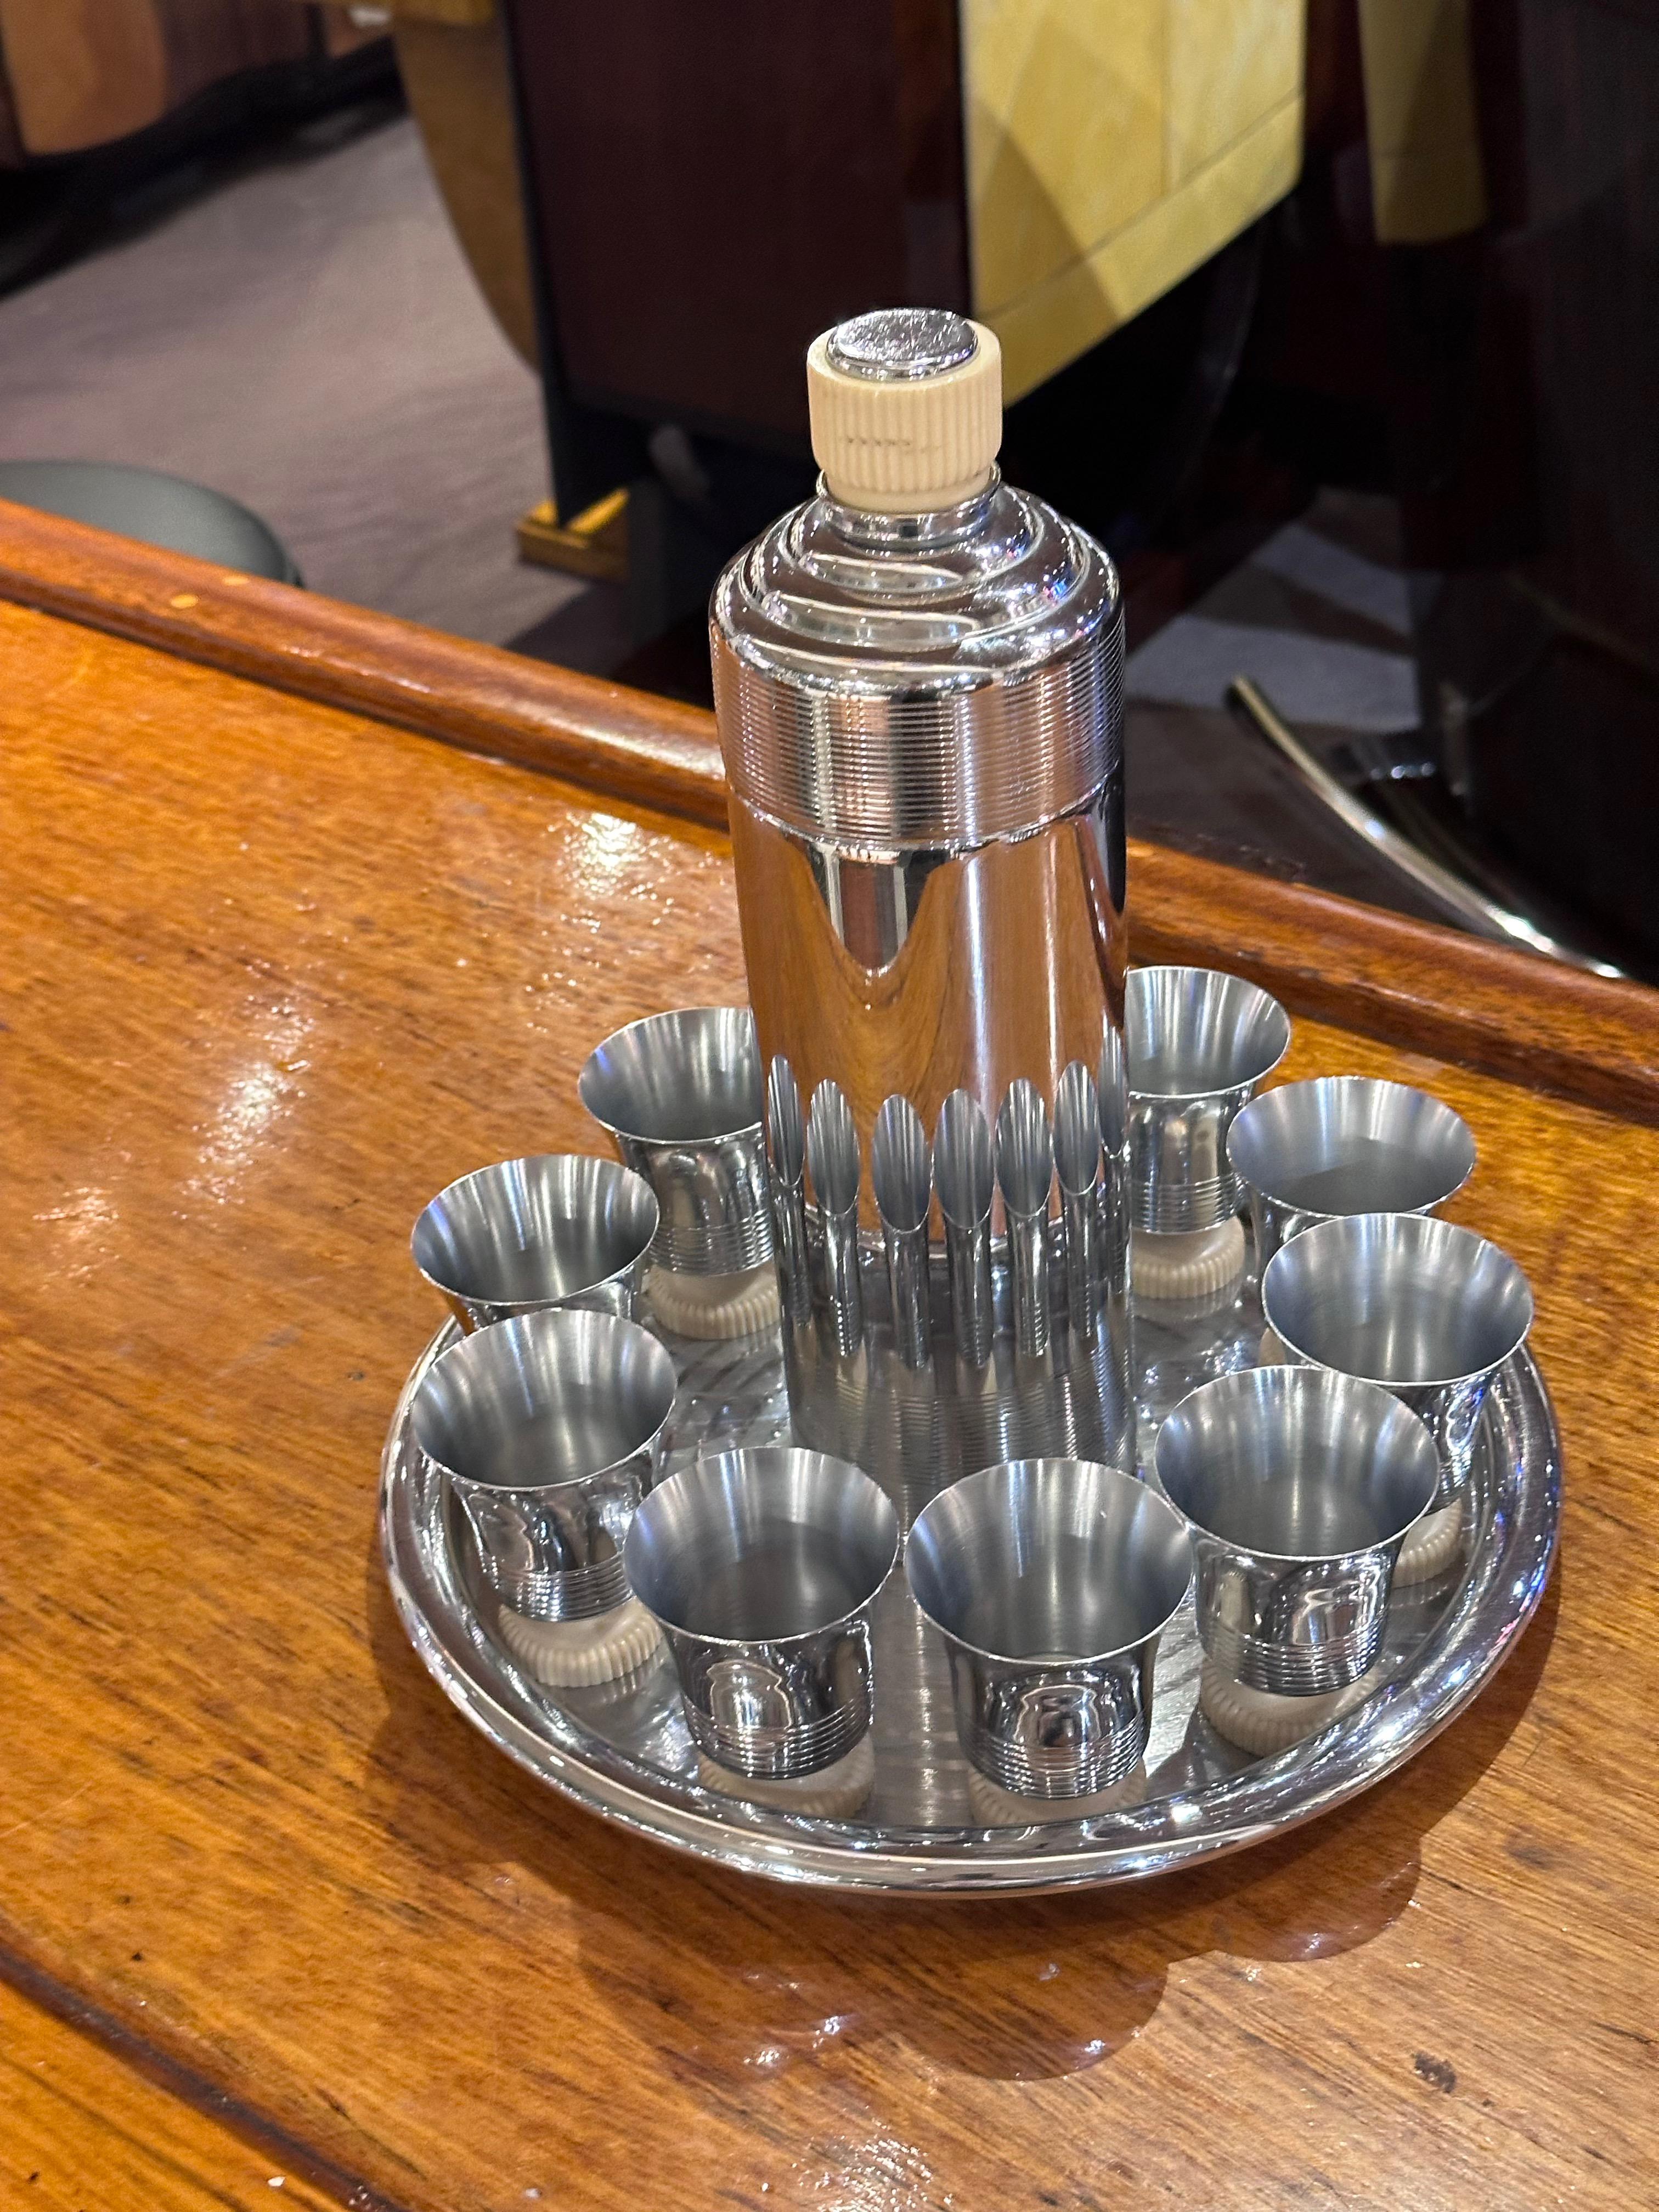 This exquisite Chase White Doric Cocktail Shaker set, a true embodiment of the glamorous Art Deco era, is a collector’s dream. Crafted in the 1930s by the esteemed Chase Brass & Copper Company, this 12-piece set epitomizes the opulence and